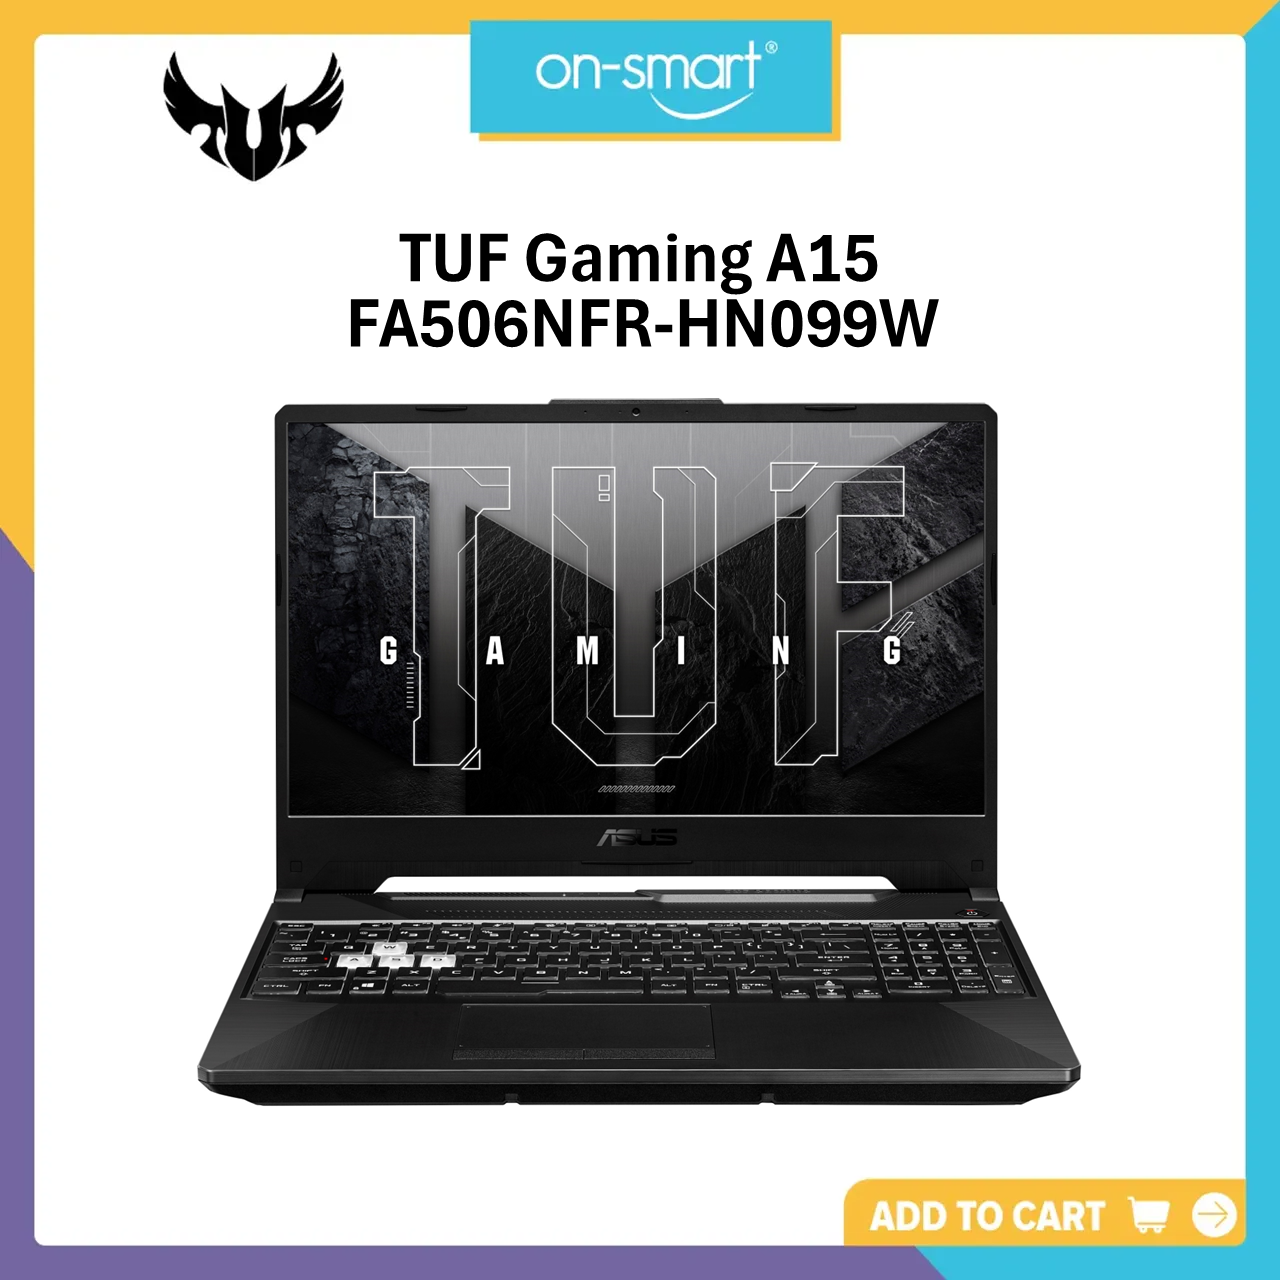 ASUS TUF Gaming A15 FA506NFR-HN099W